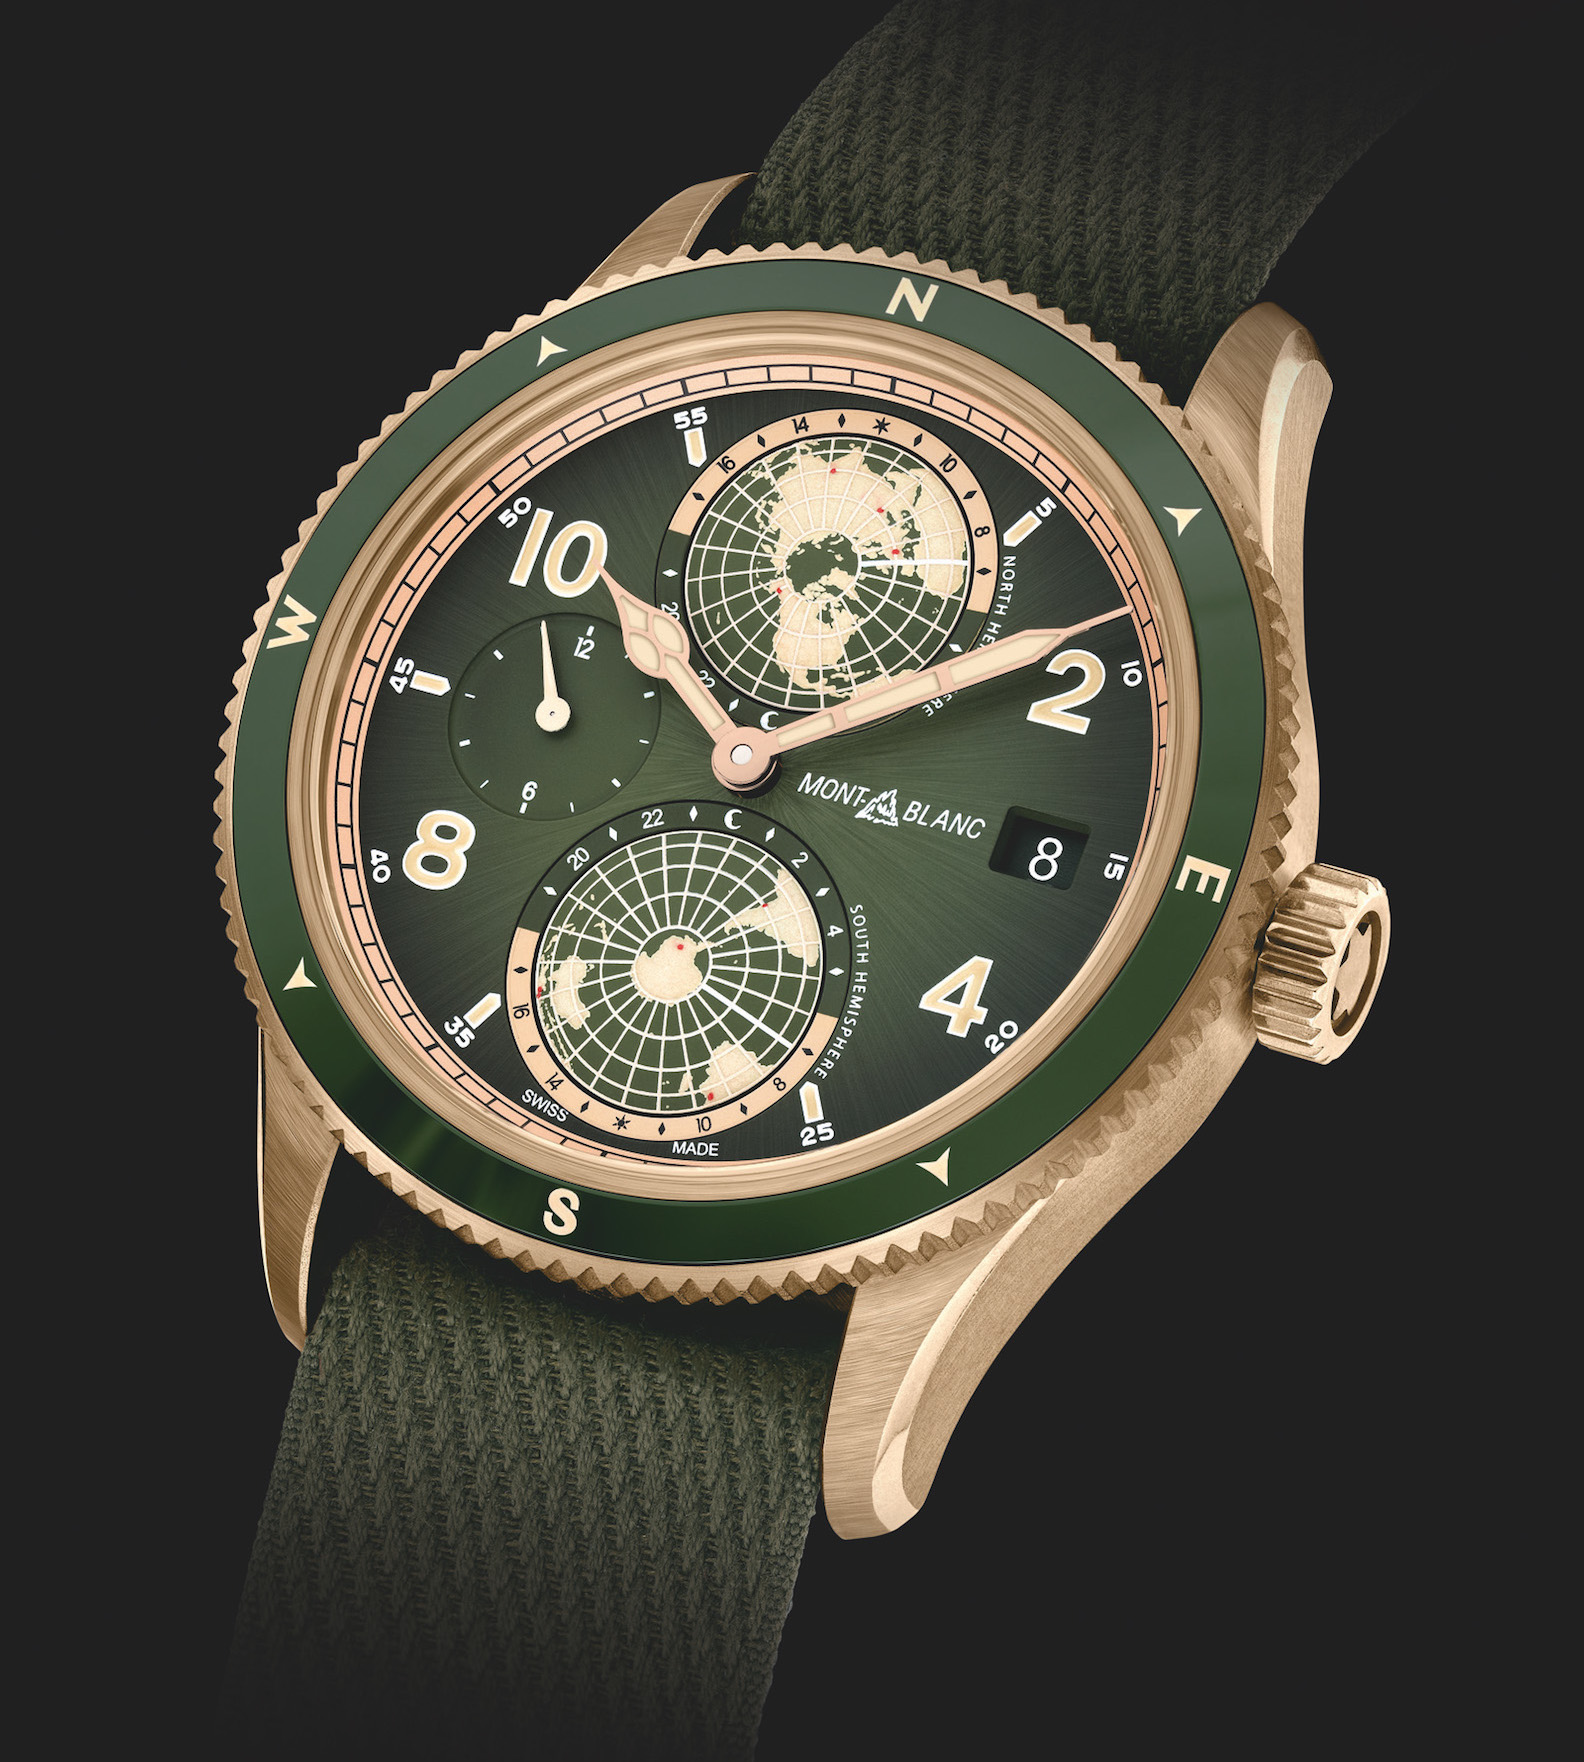 Montblanc – Reconnecting through nature with new Montblanc Timepieces in Khaki Green